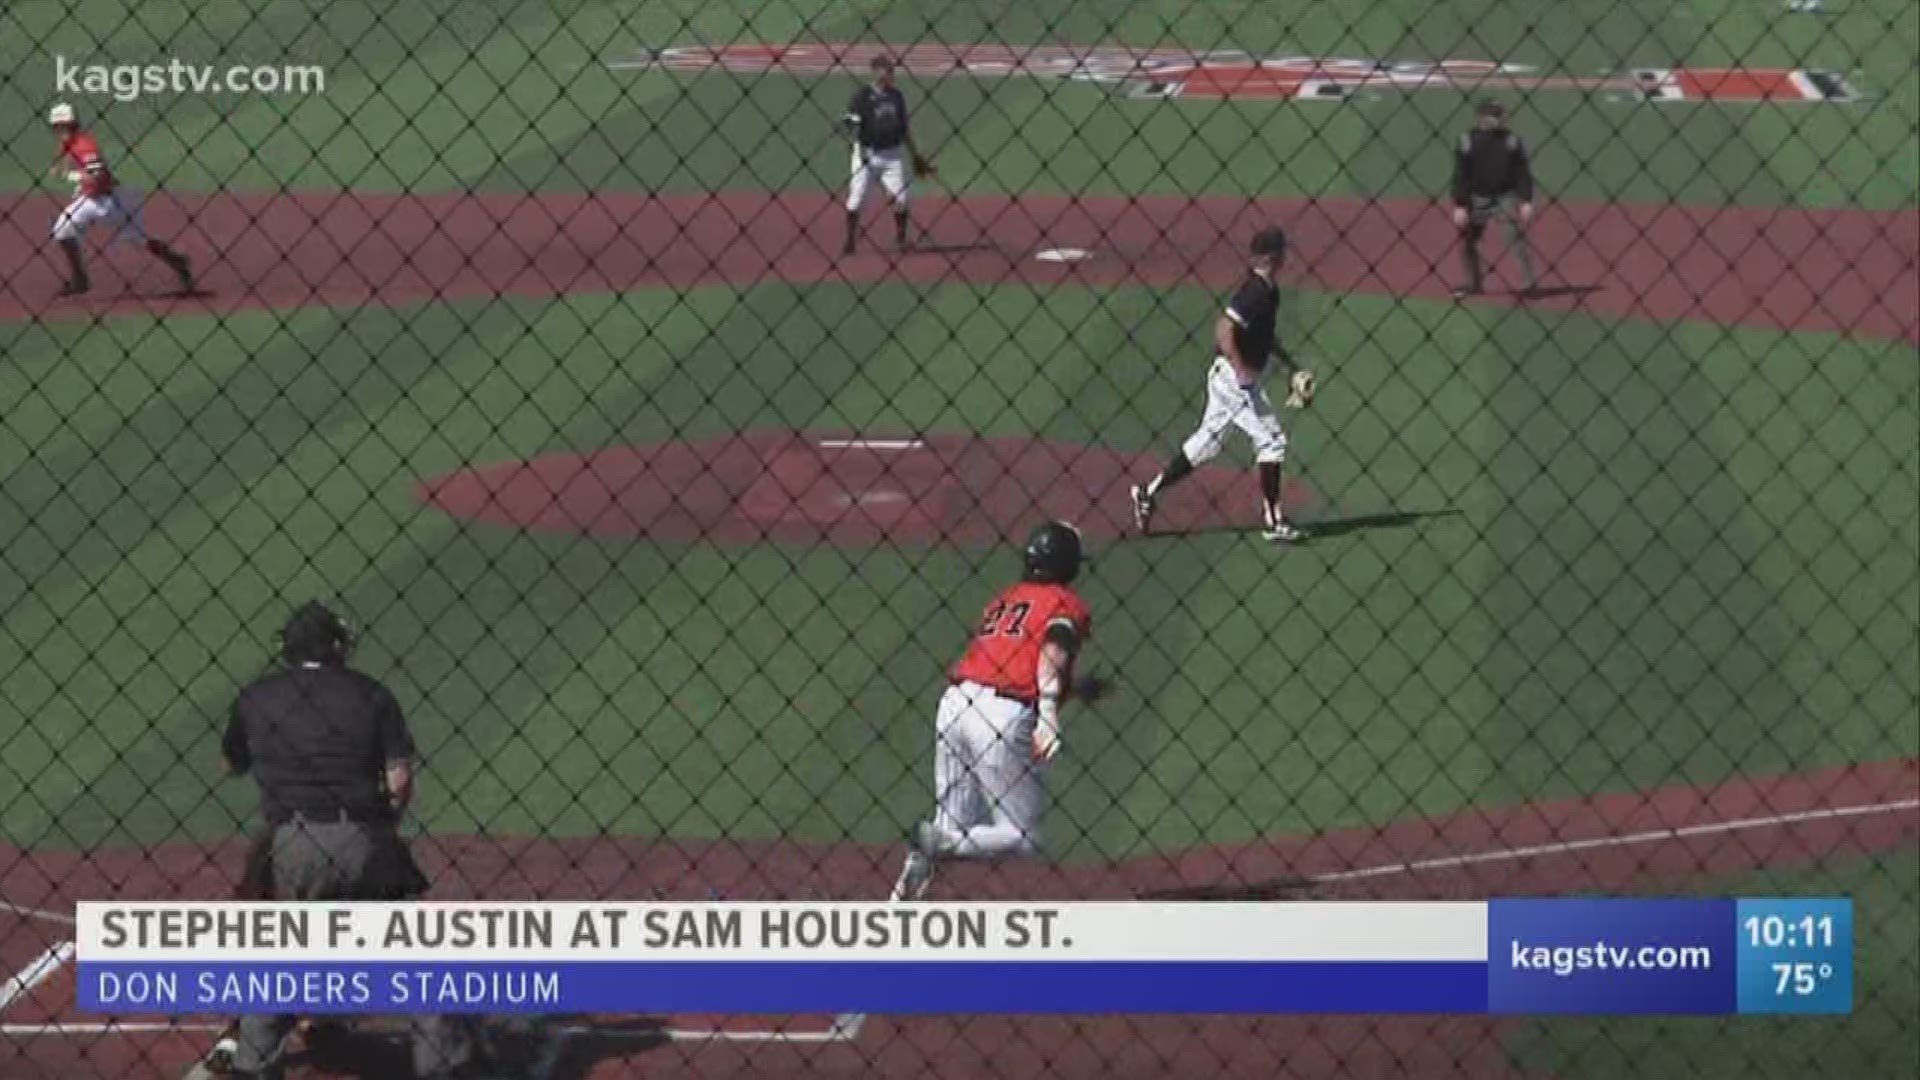 Sam Houston State took down SFA 5-2 to win the diamond version of The Battle of the Piney Woods.